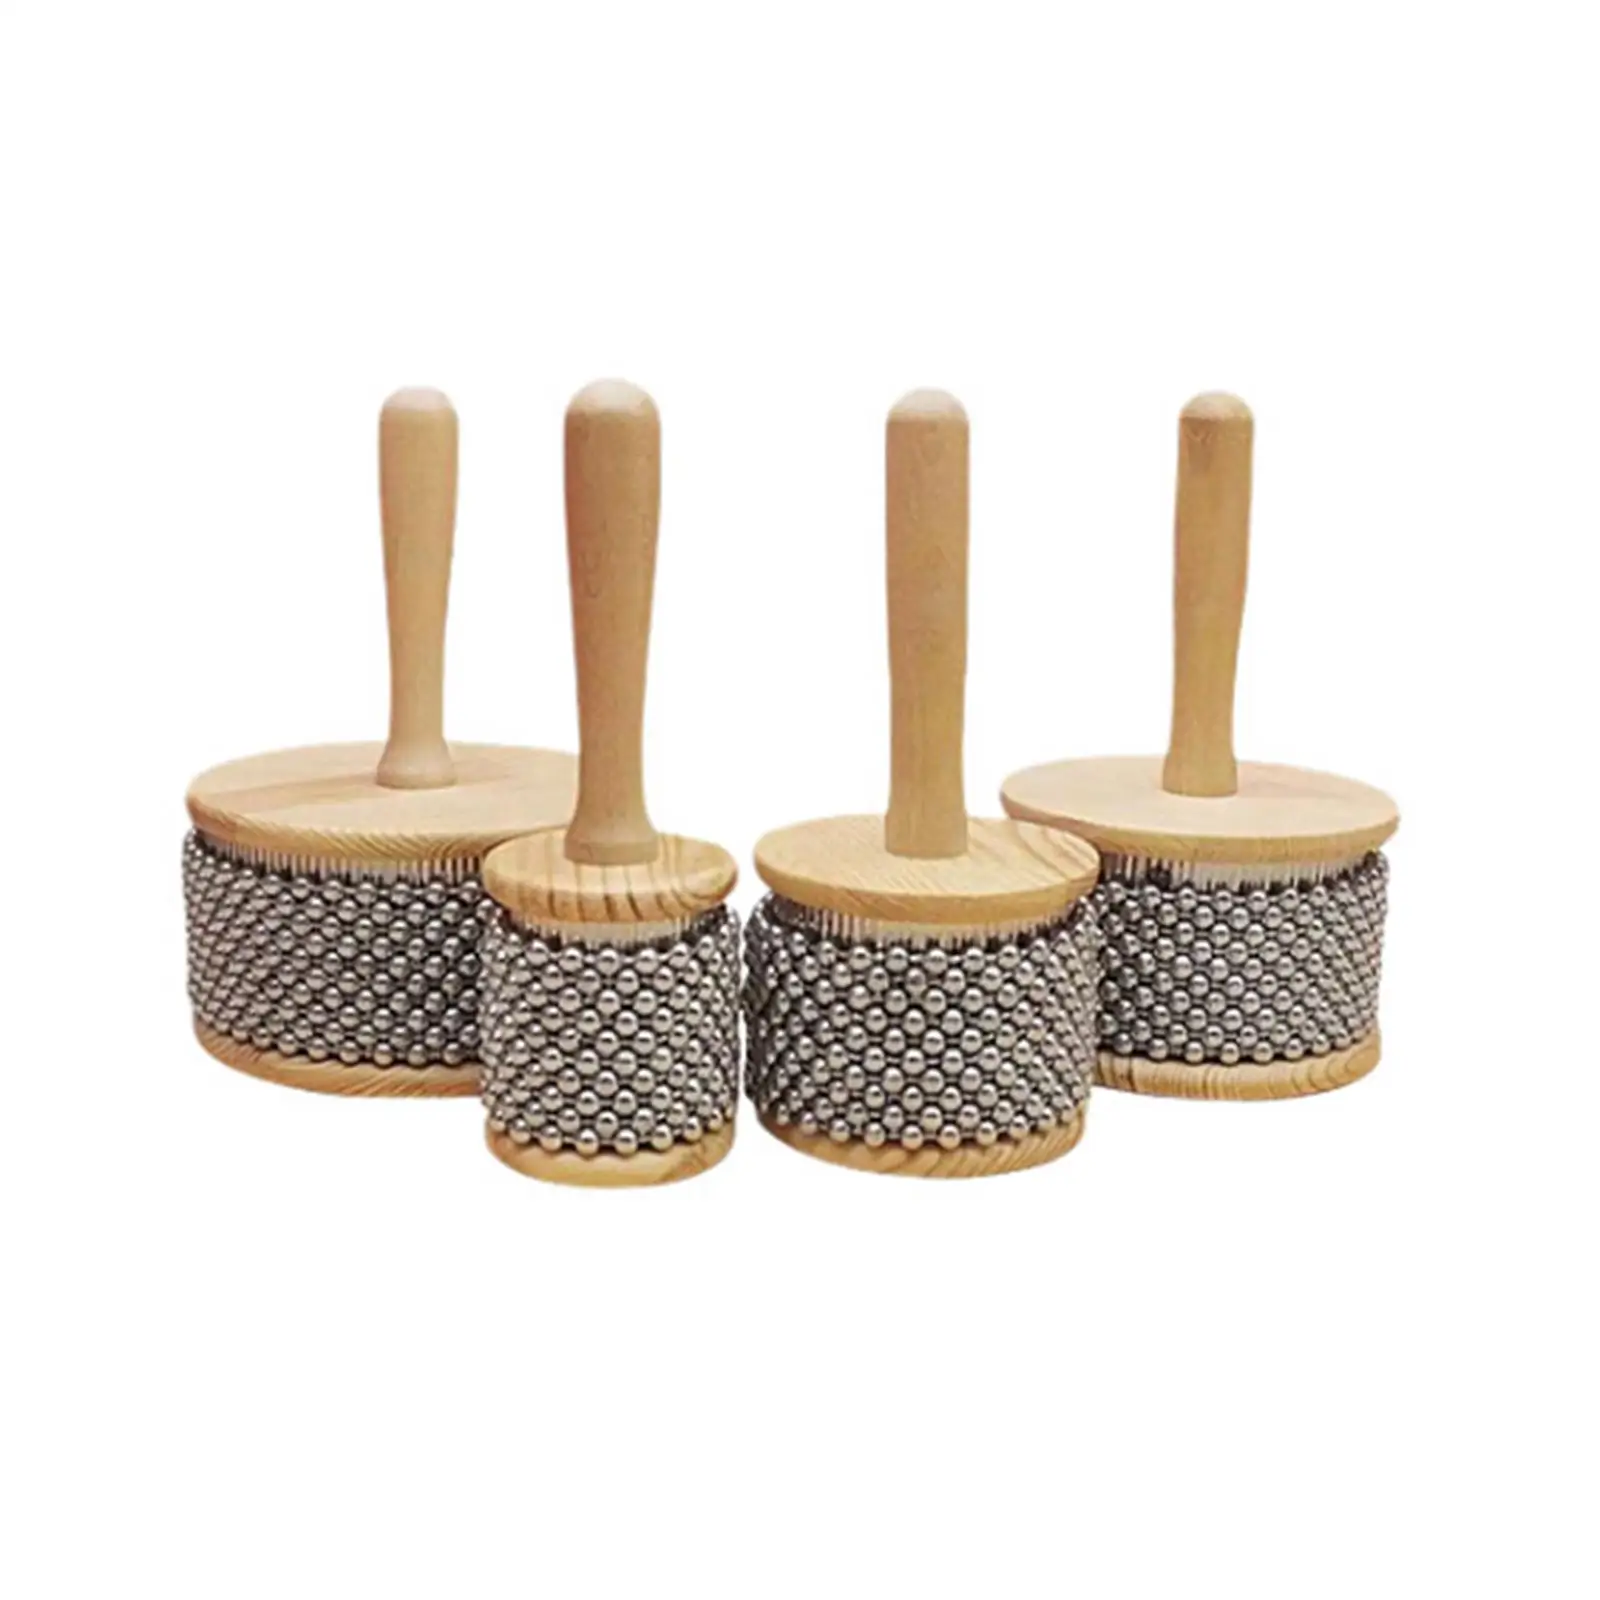 Wooden Cabasa Hand Shaker W/ Metal Beads Percussion Instrument Cabasa Music Instrument Musical Toy for Classroom Playing at Home